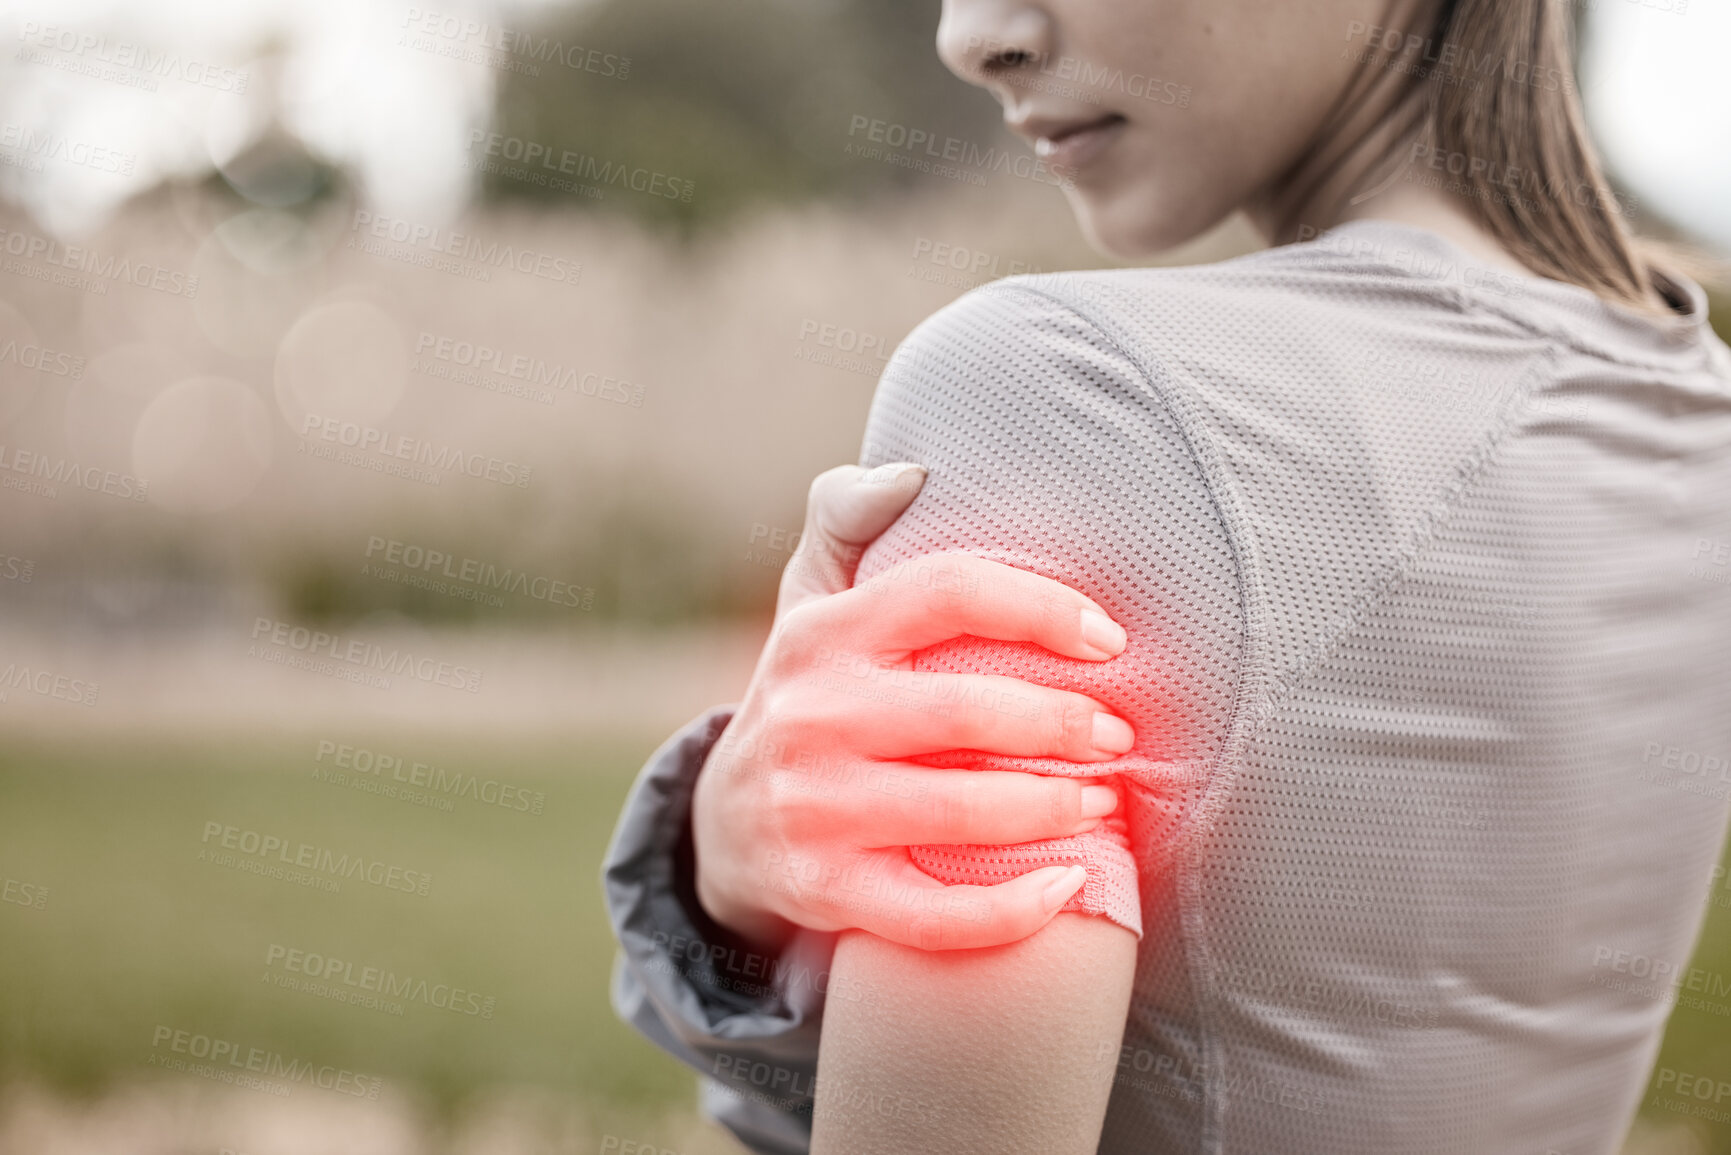 Buy stock photo Hands, arm pain and injury in nature after accident, workout or training outdoors. Sports, health and athlete or woman with fibromyalgia, inflammation or painful muscles arthritis and tendinitis.